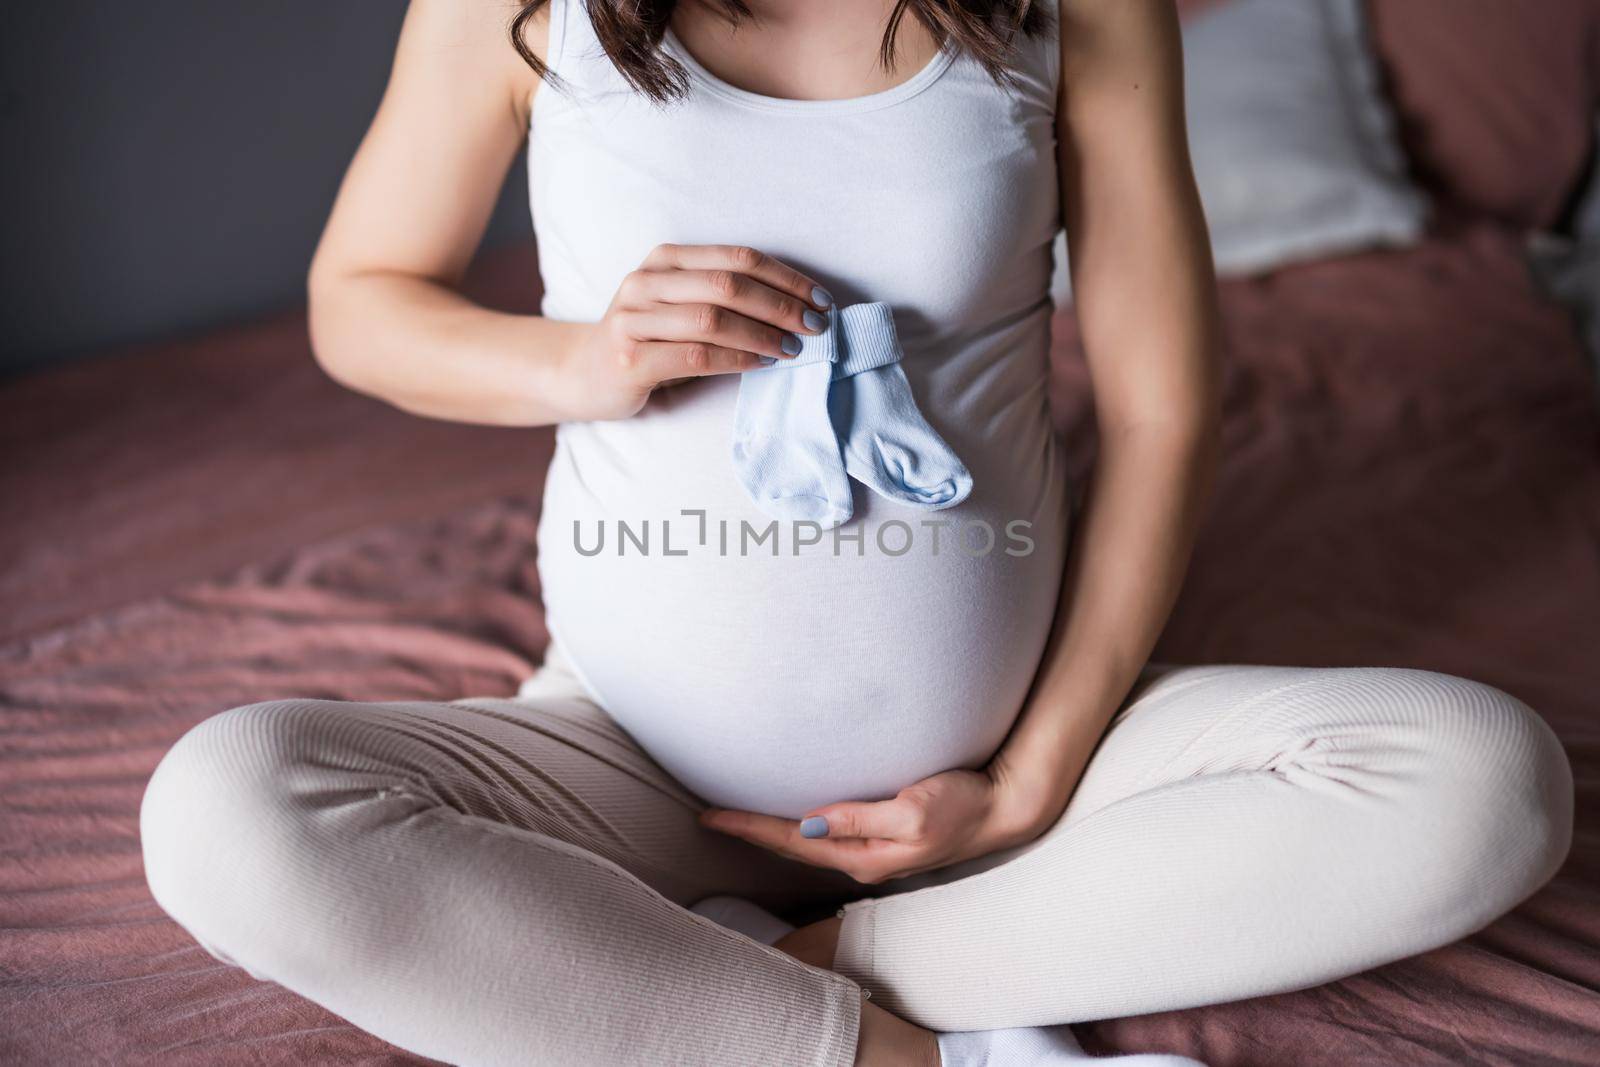 Pregnant woman relaxing at home. She is sitting on bed and holding baby socks.